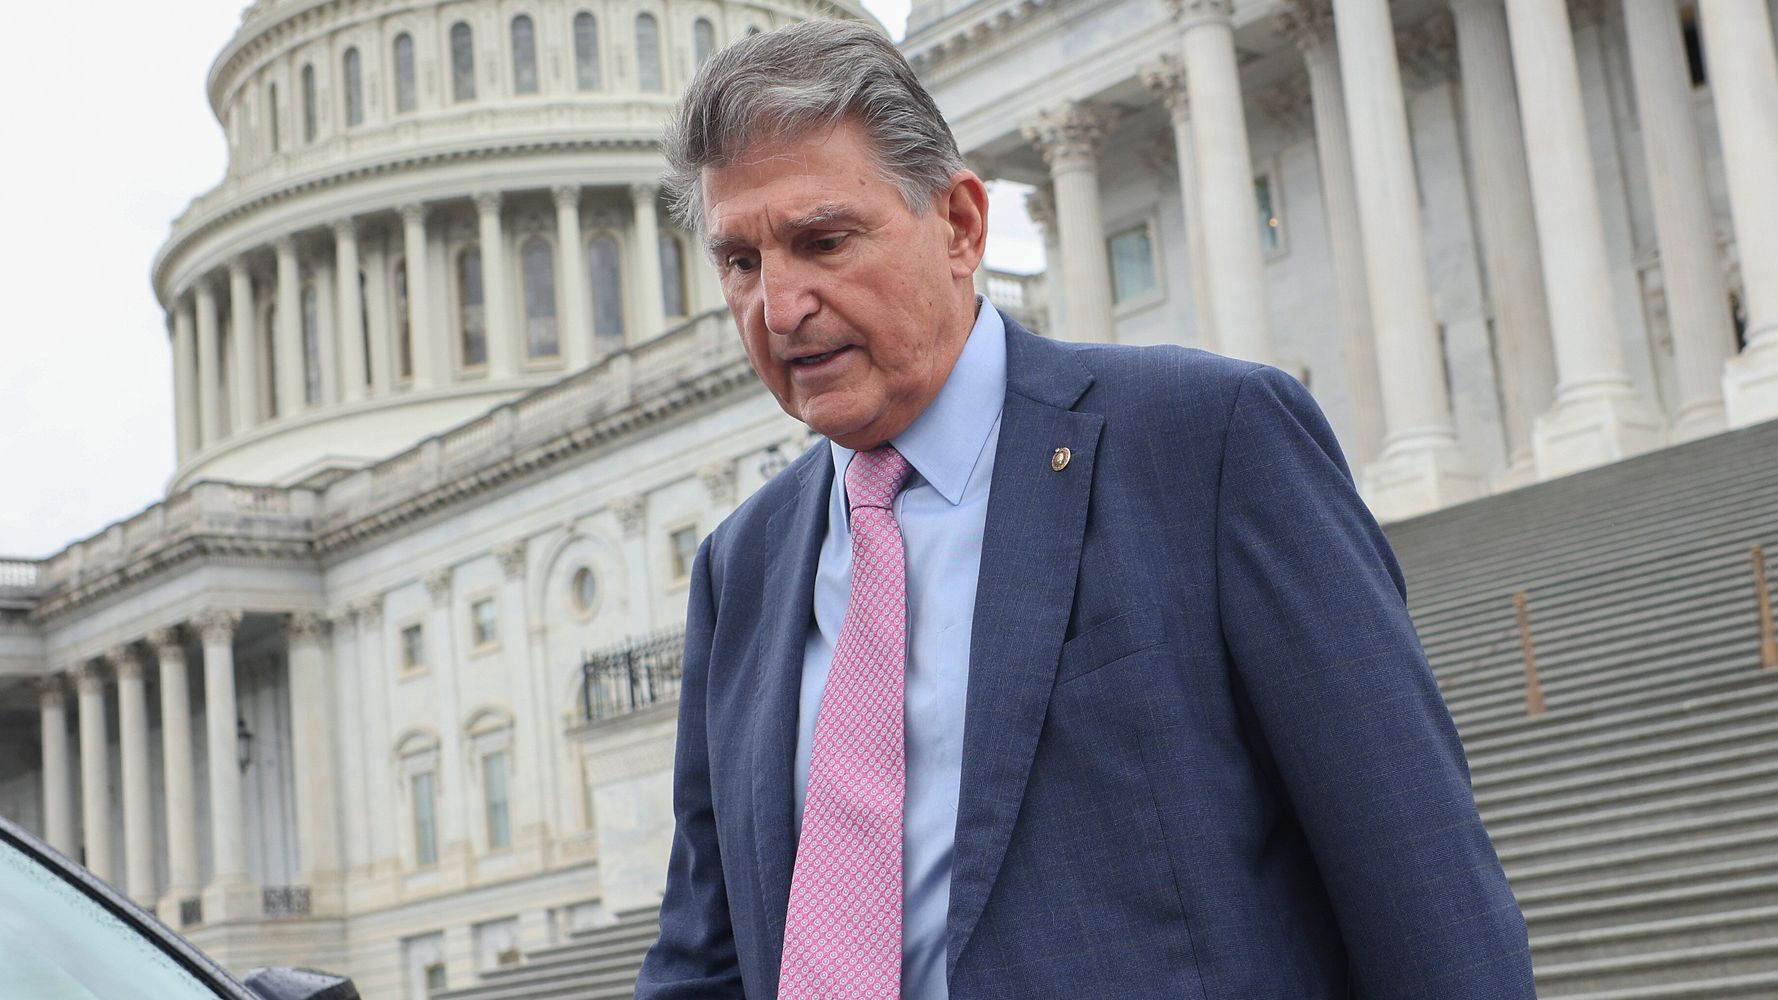 Why Manchin And Democratic Leaders Might Not Be Quite So Far Apart